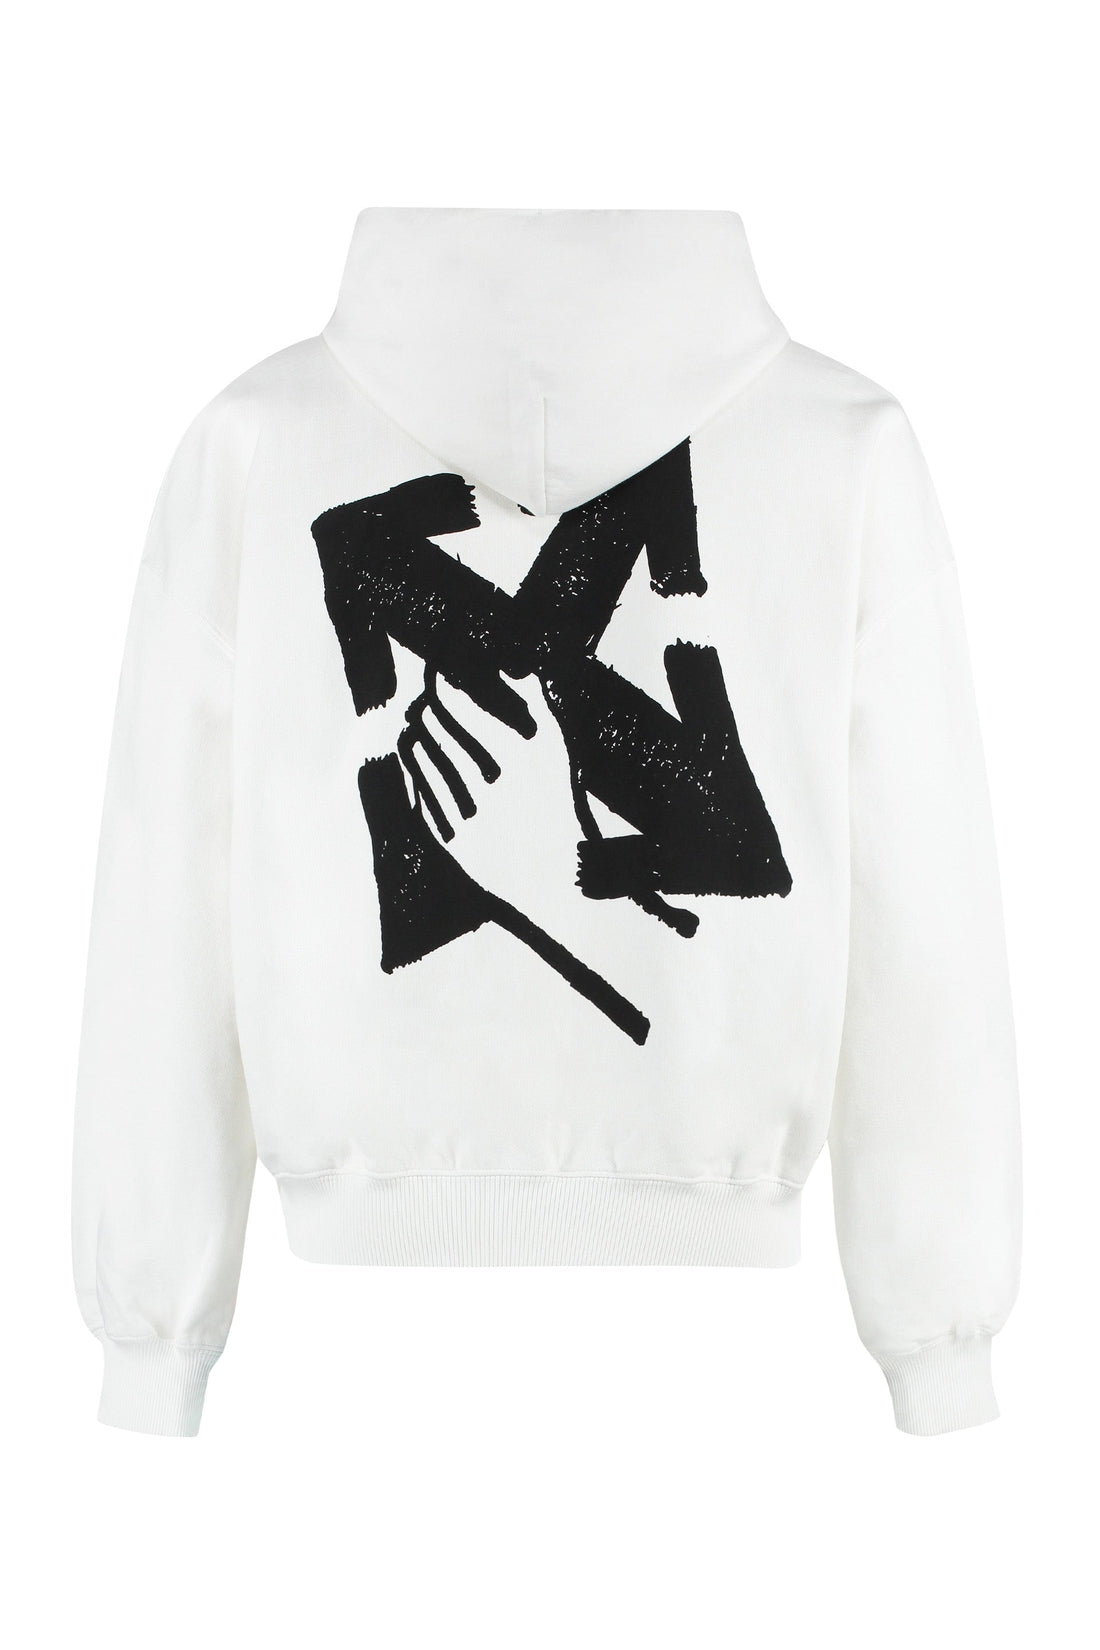 Off-White-OUTLET-SALE-Hooded sweatshirt-ARCHIVIST